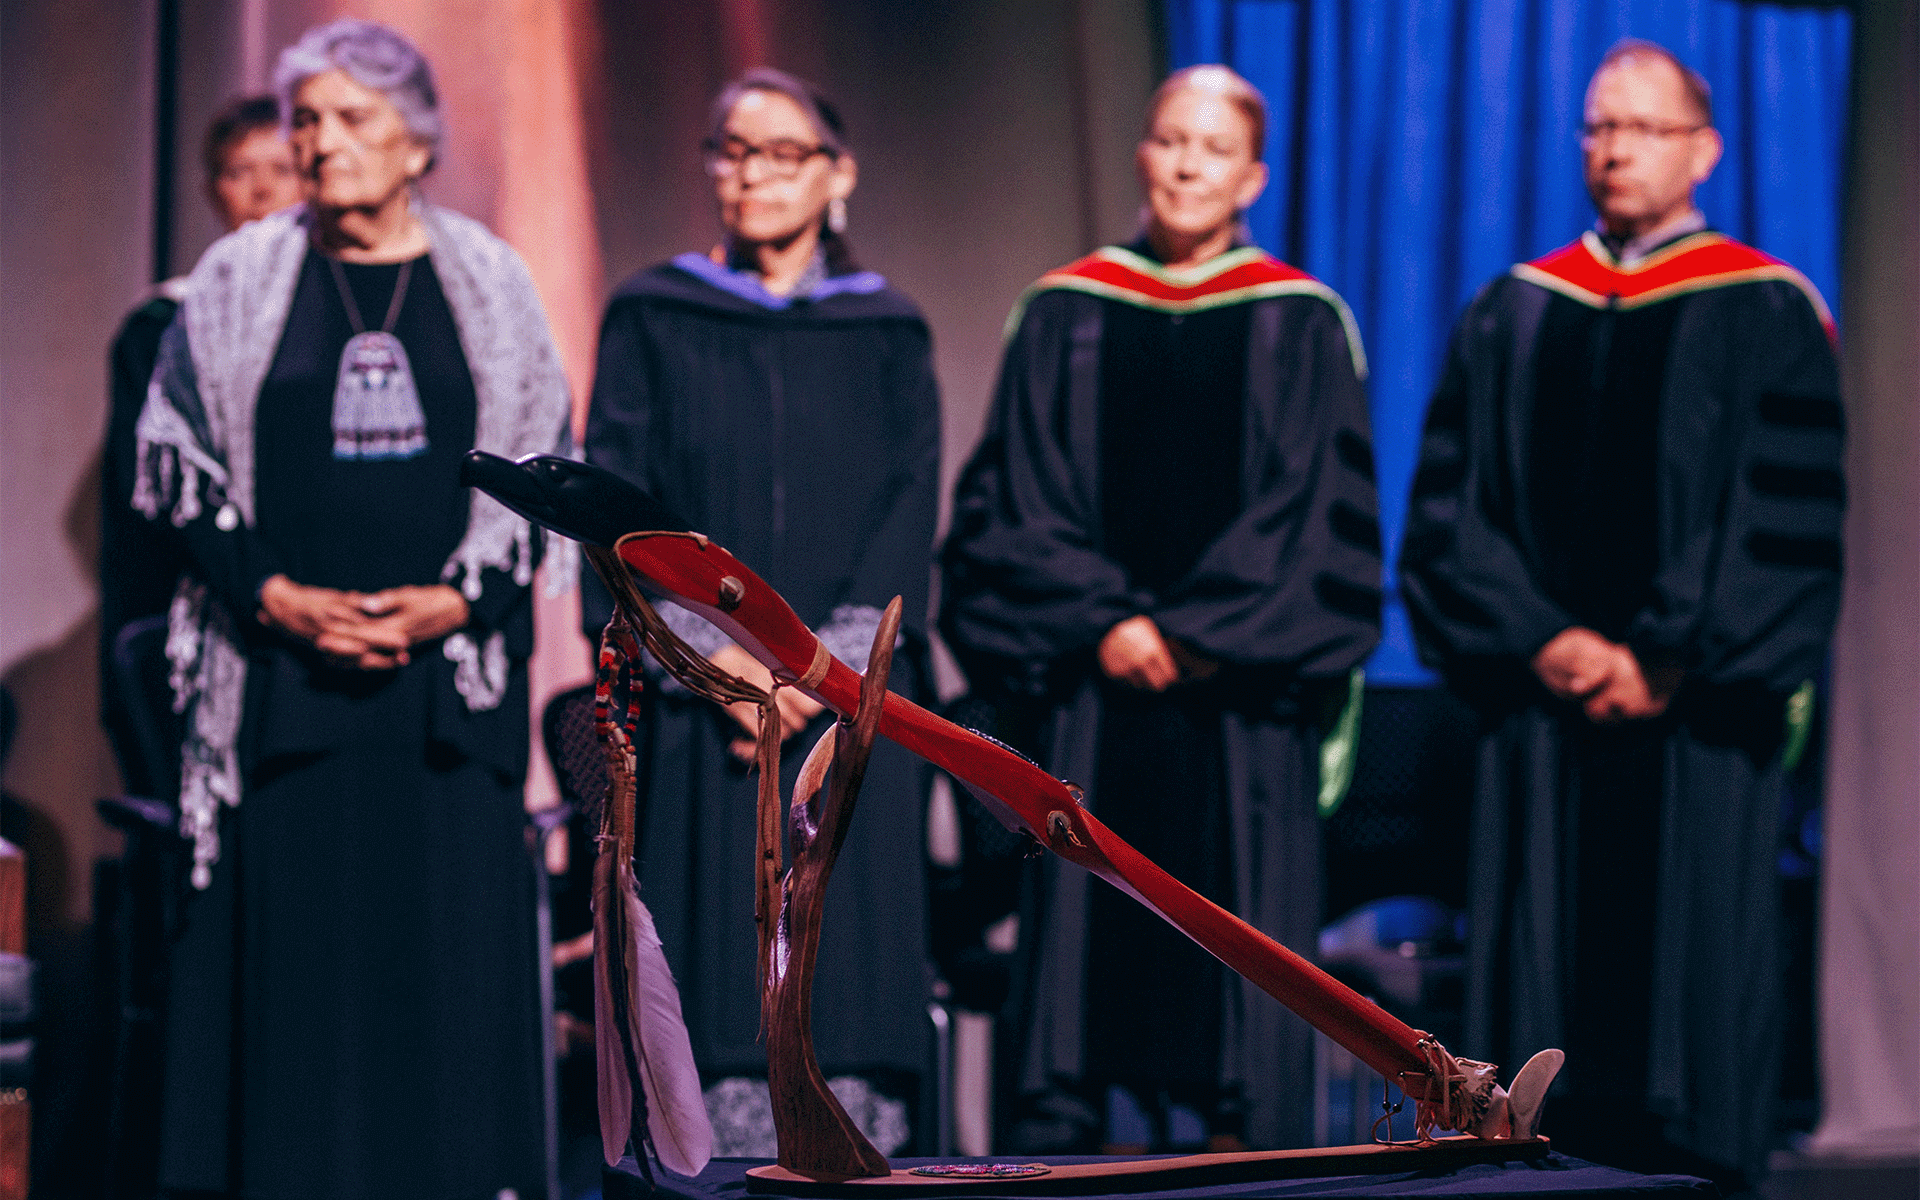 Four people sitting in the background during the convocation ceremony and the image is focused on the Athabasca University Mace